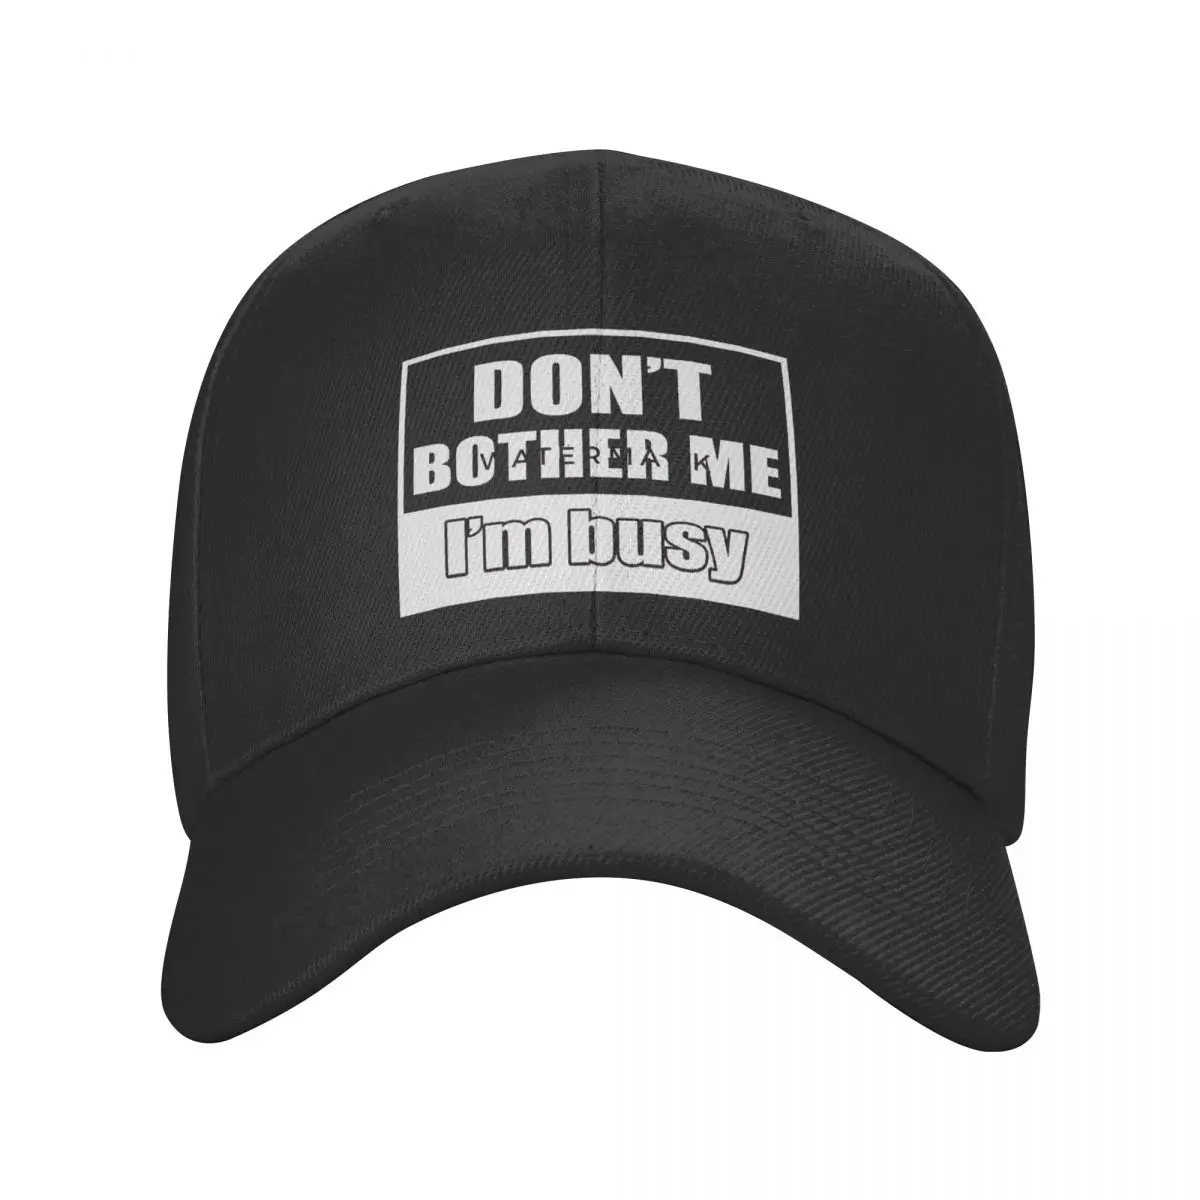 

Dont Bother Me Im Busy Casquette, Polyester Cap Retro Cute Wind Unisex Suitable For Daily Nice Gift